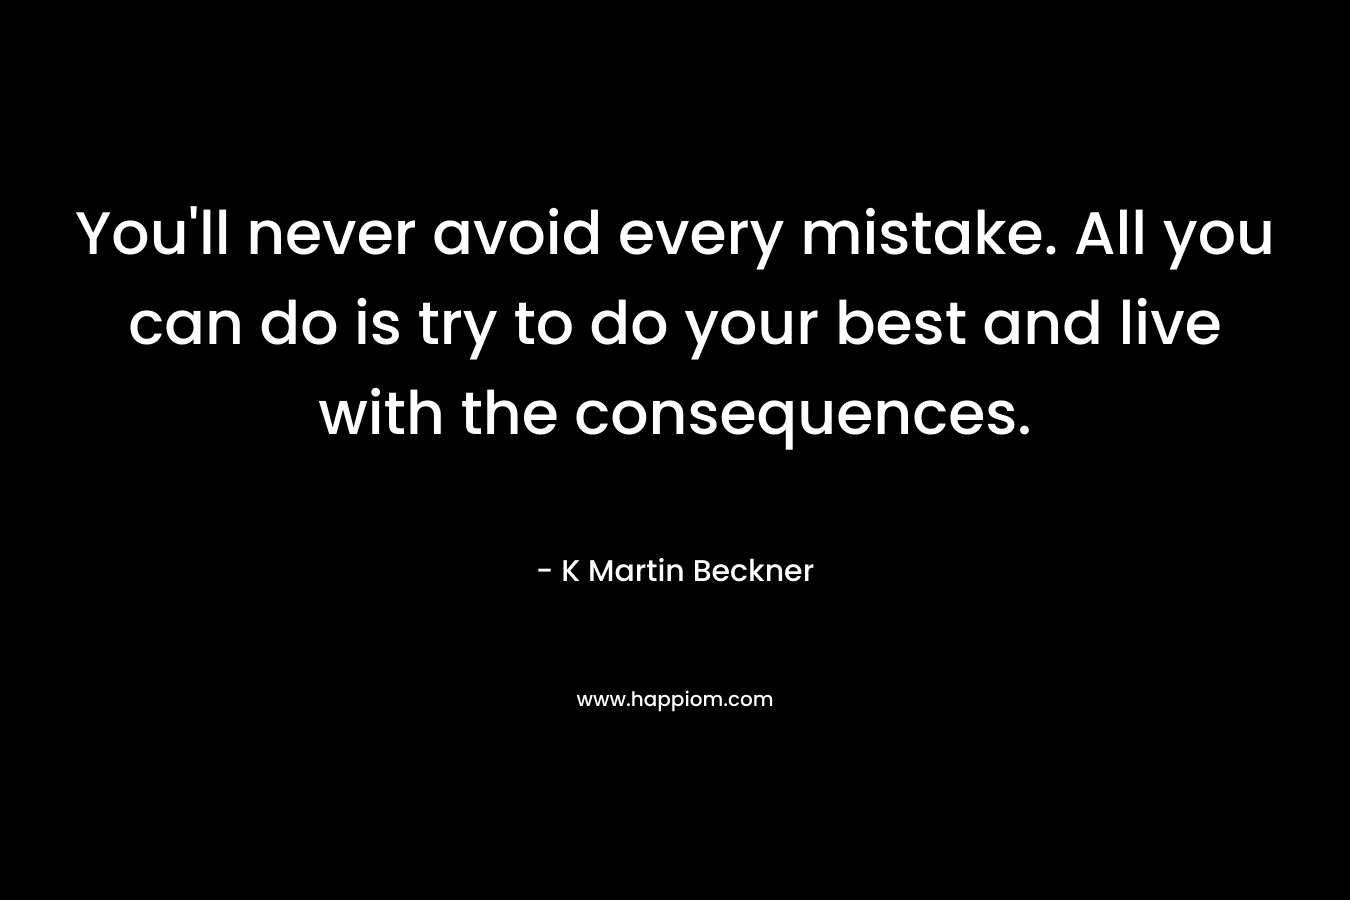 You'll never avoid every mistake. All you can do is try to do your best and live with the consequences.